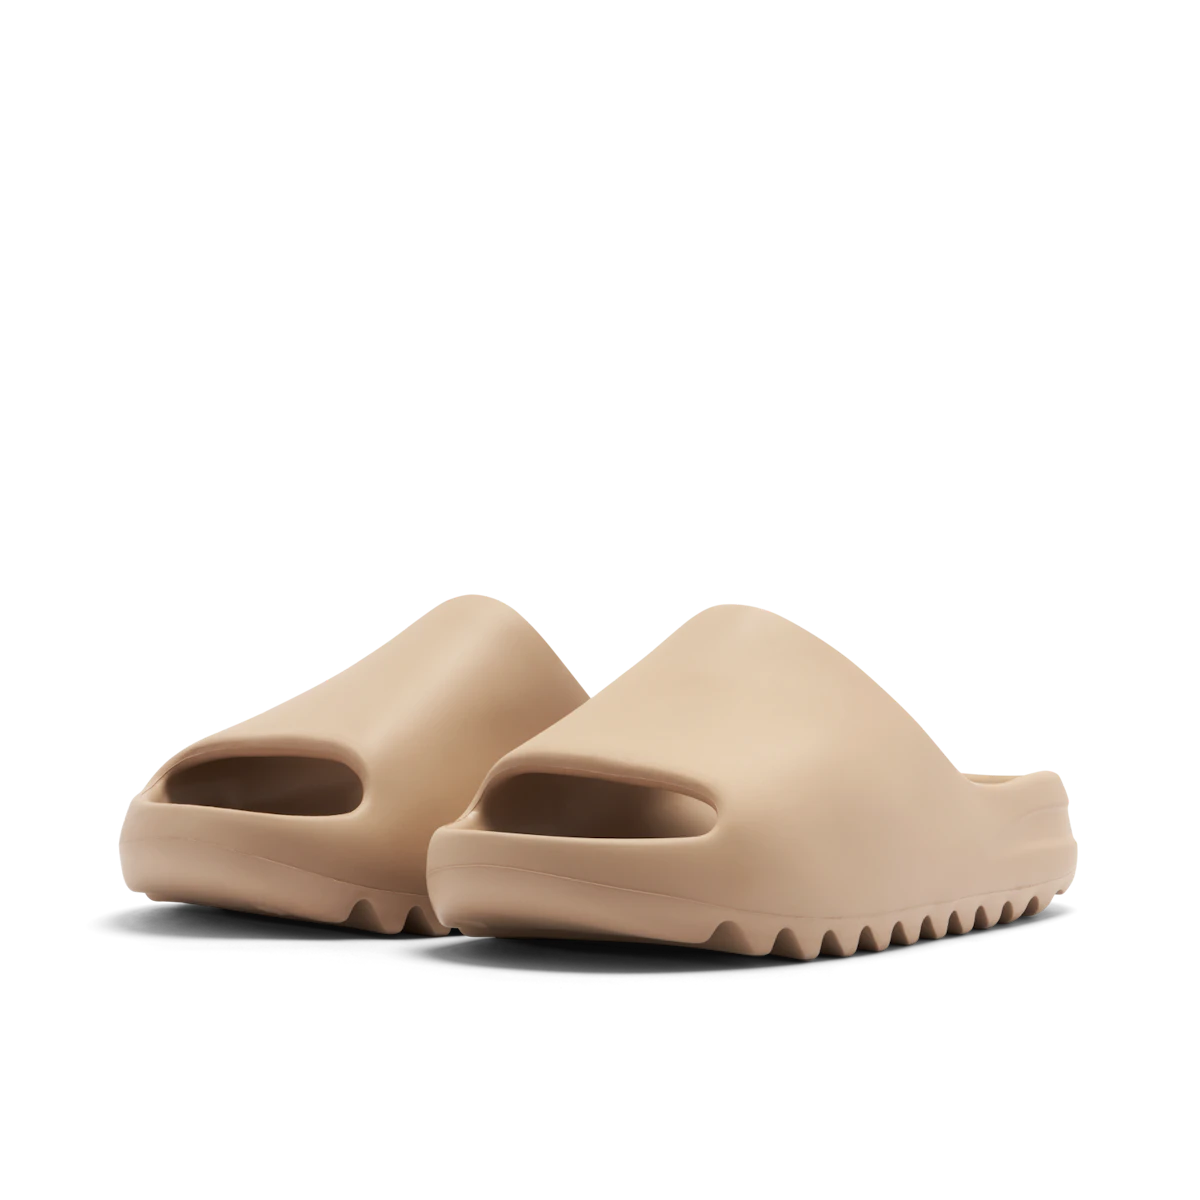 Yeezy Slide Pure (First Release)